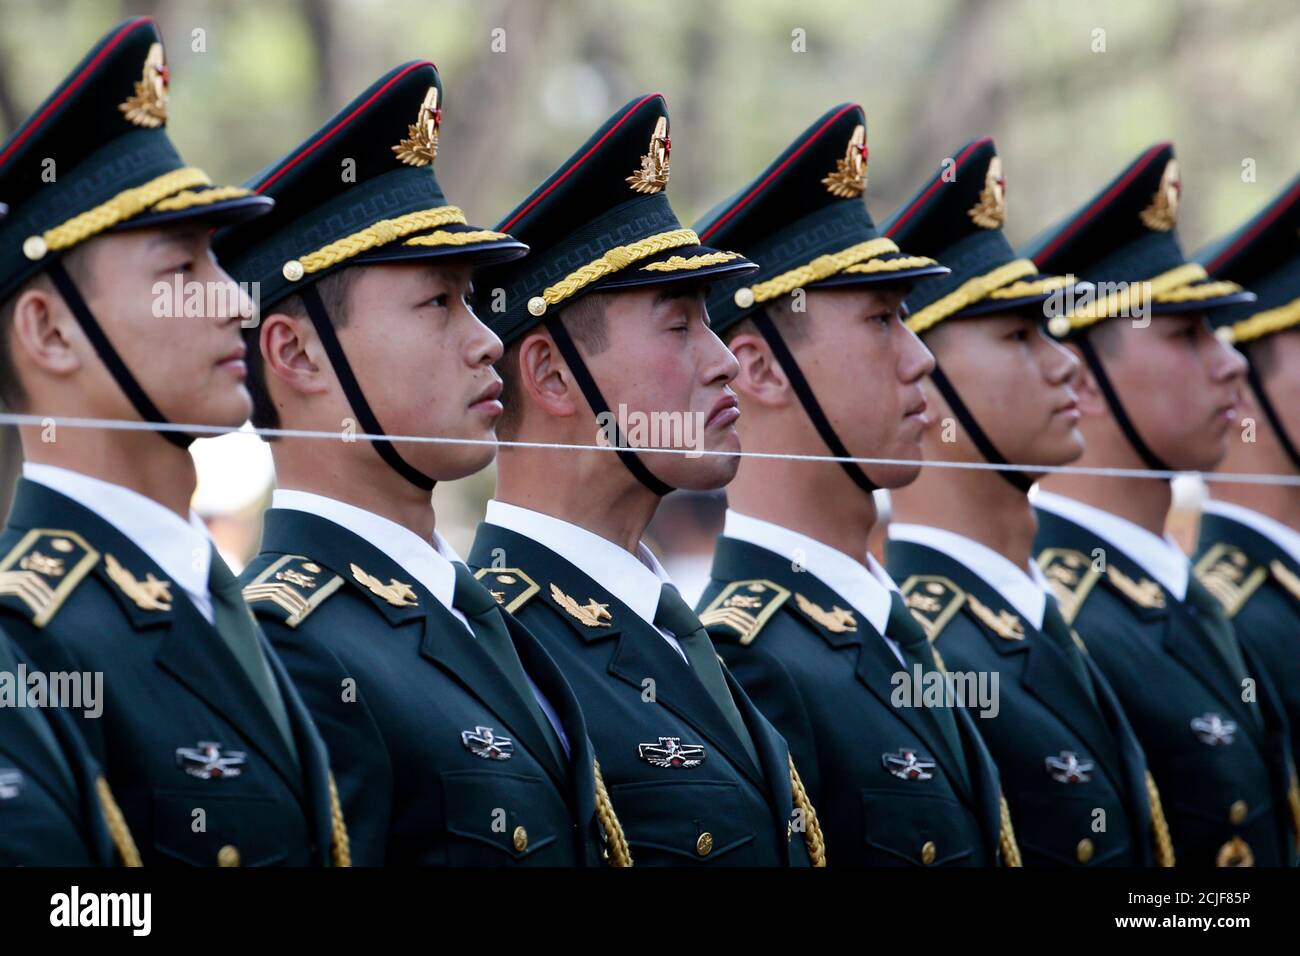 Members of a Chinese People's Liberation Army (PLA) honour guard stand  behind a string to ensure that they are in a straight line before a  welcoming ceremony for Swiss President Johann Schneider-Ammann